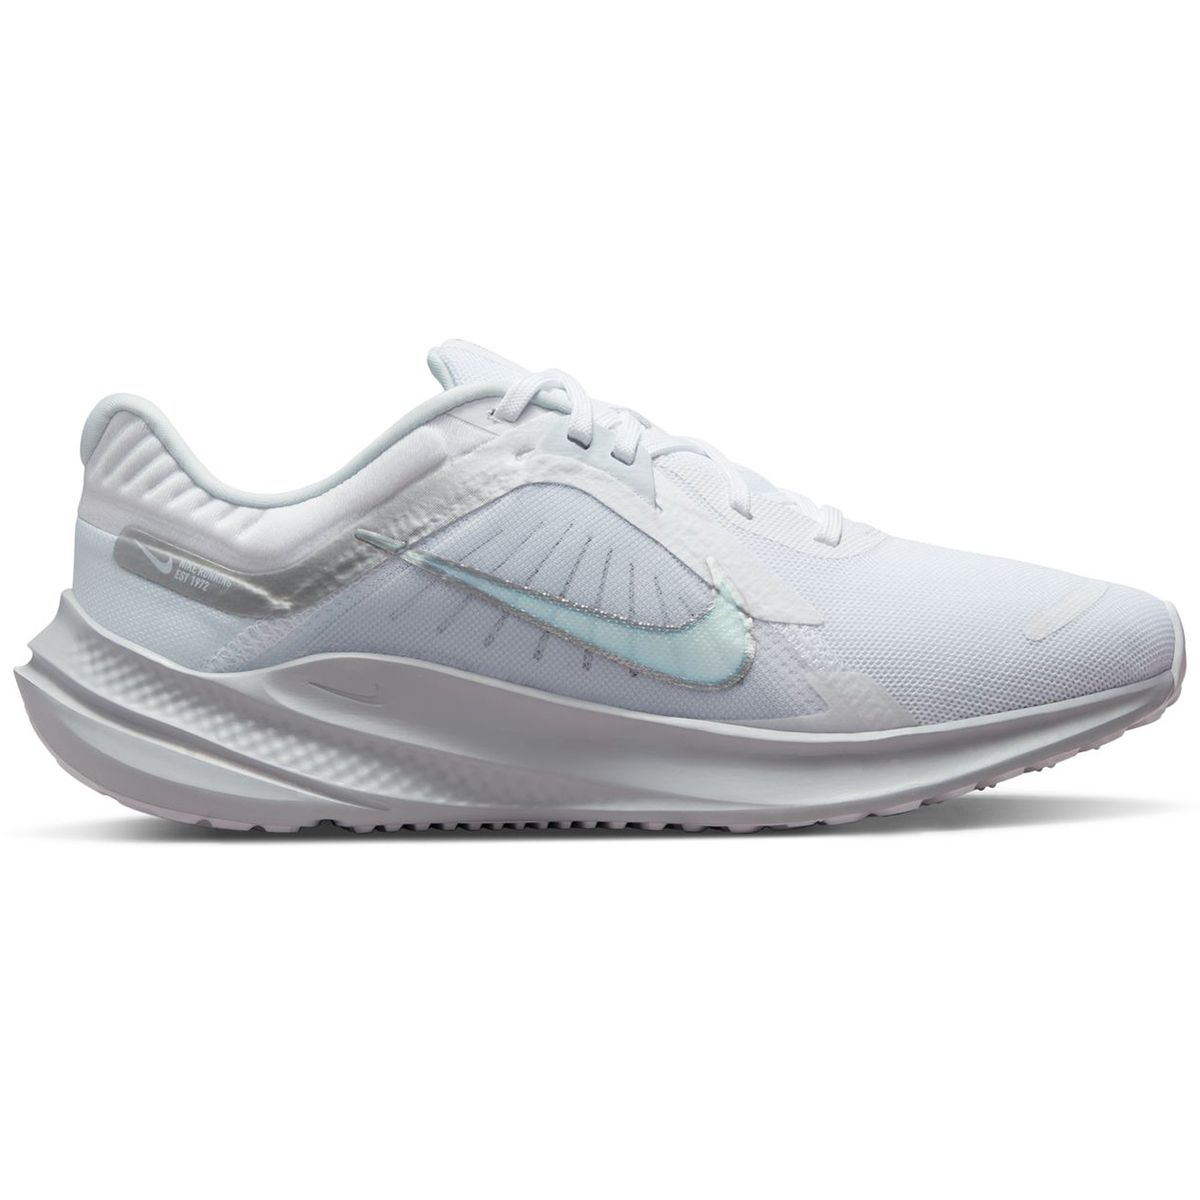 Nike Quest 5 Women's Road Running Shoes DD9291-100